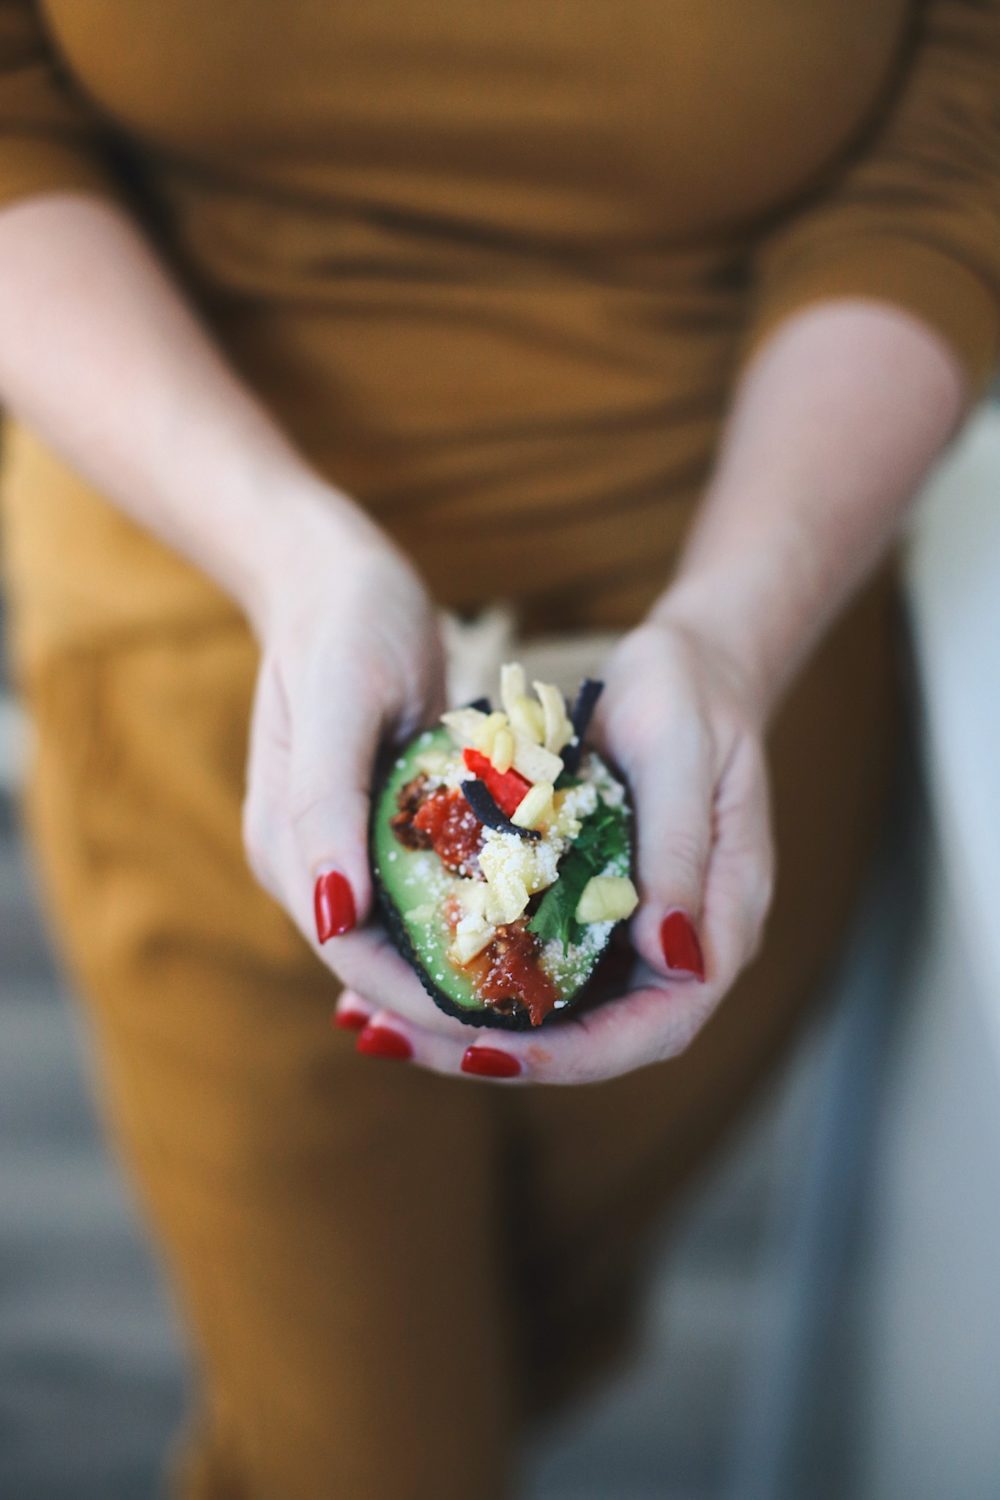 Avocado Keto Taco Bowls recipe featured by top Florida lifestyle blog, Fresh Mommy Blog: Easy Entertaining with Make-Your-Own Avo Taco Bowls | Keto Taco Bowls by popular Florida lifestyle blog, Fresh Mommy Blog: image of a woman holding a keto taco bowl in her hands. 